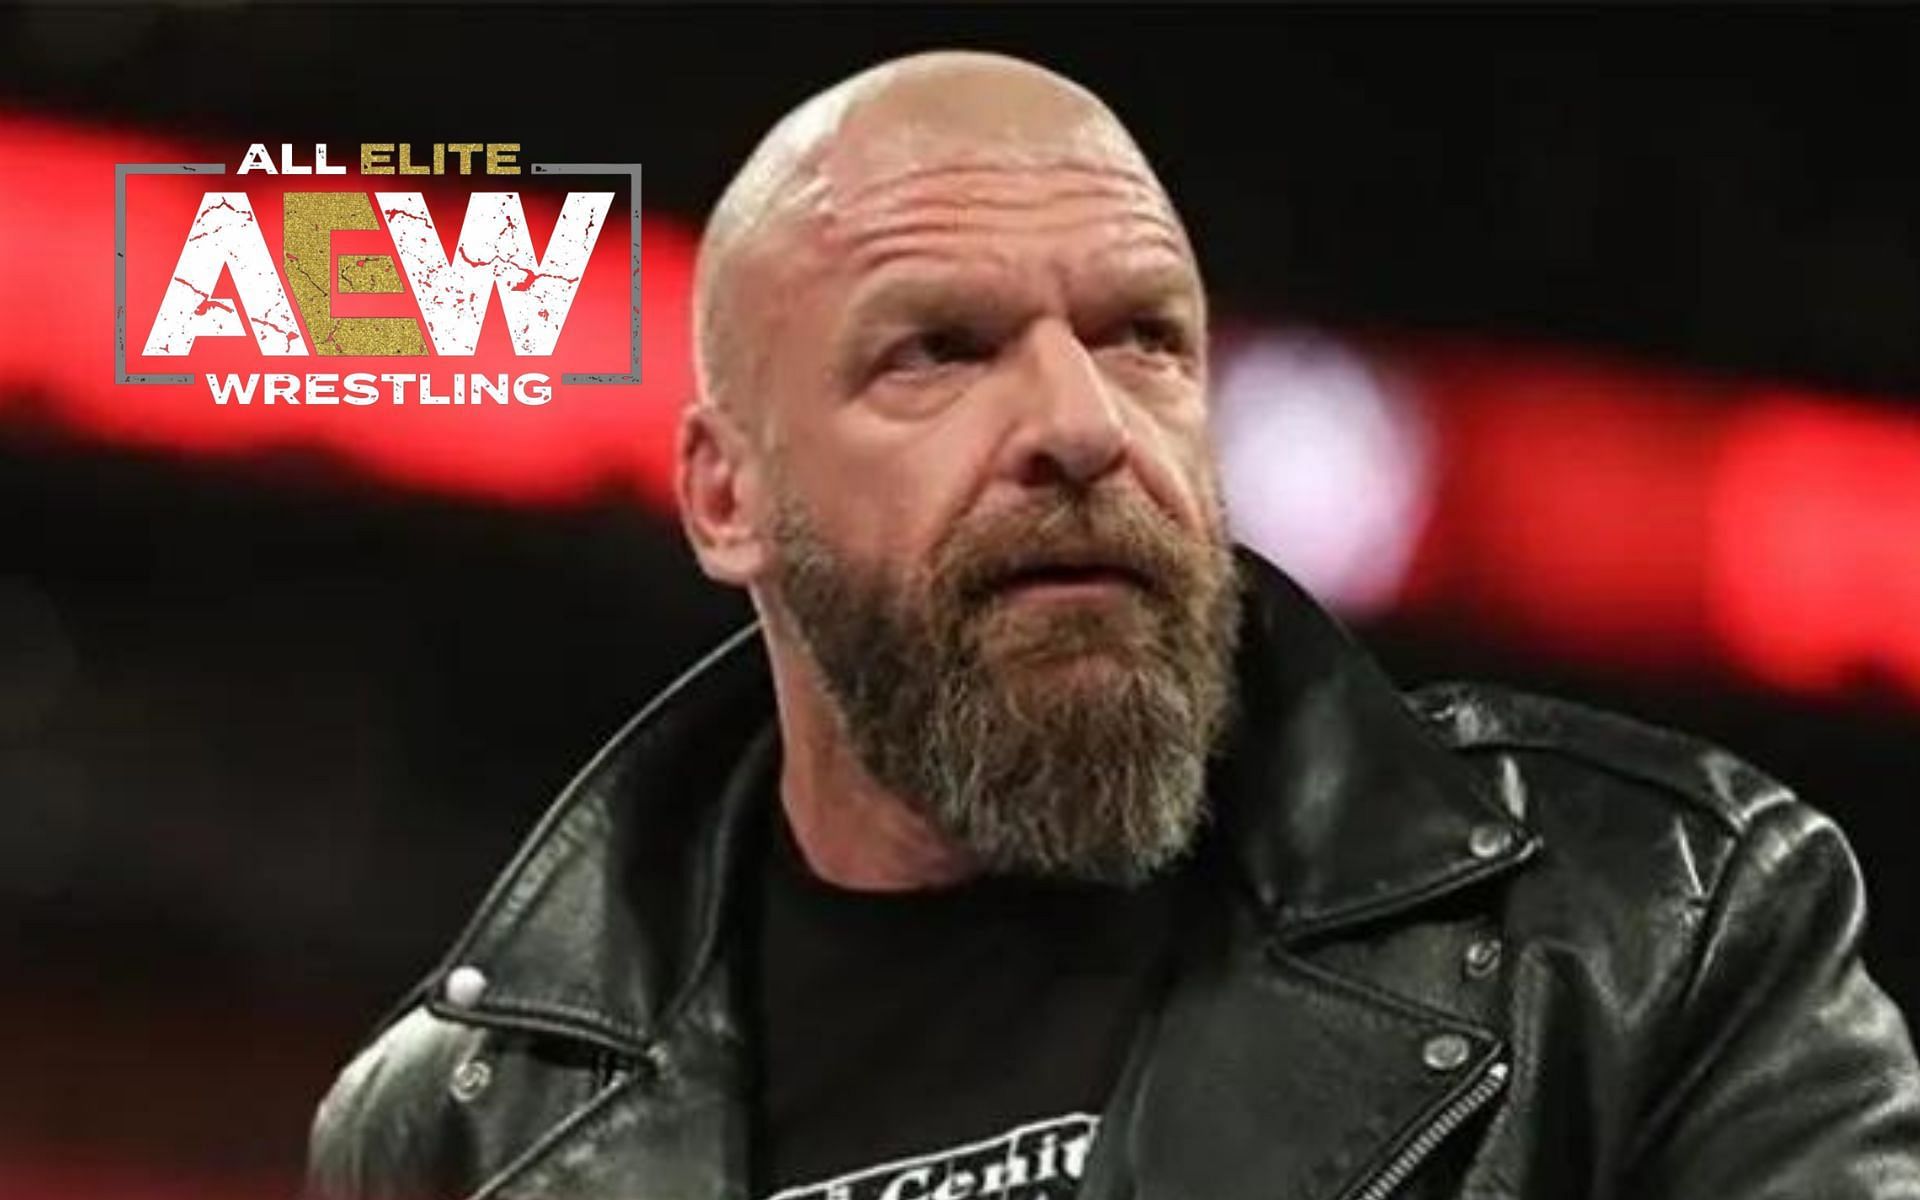 Triple H took is currently the Executive Vice President of Talent Relations in WWE